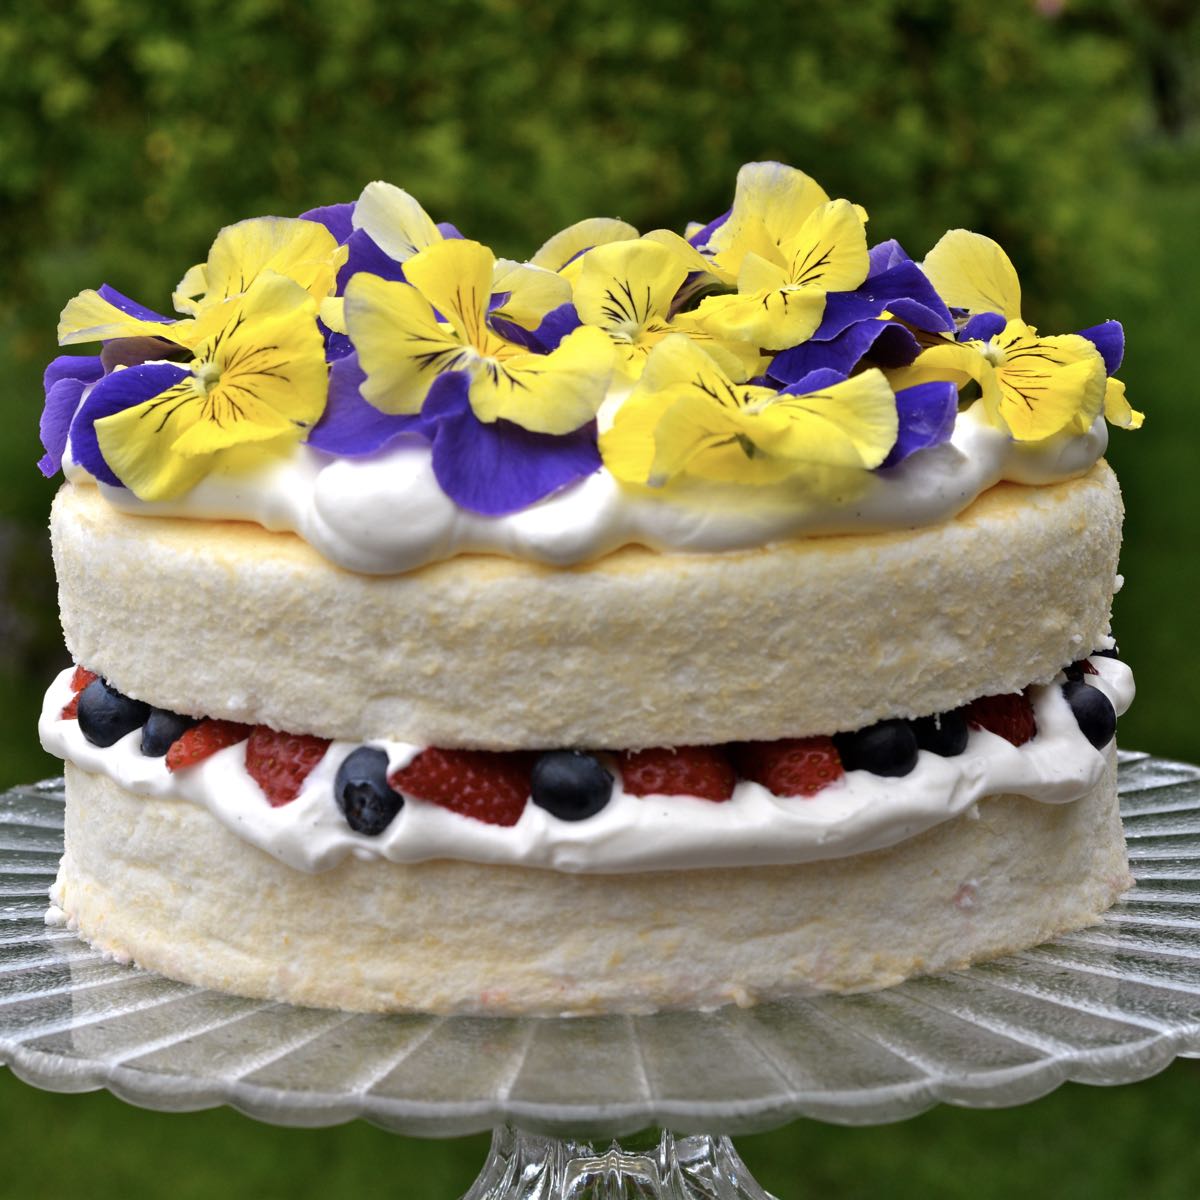 A Gluten Free Angel Food Cake filled with whipped cream and fresh berries, garnished with yellow and purple pansies and served on a glass pedestal tray.